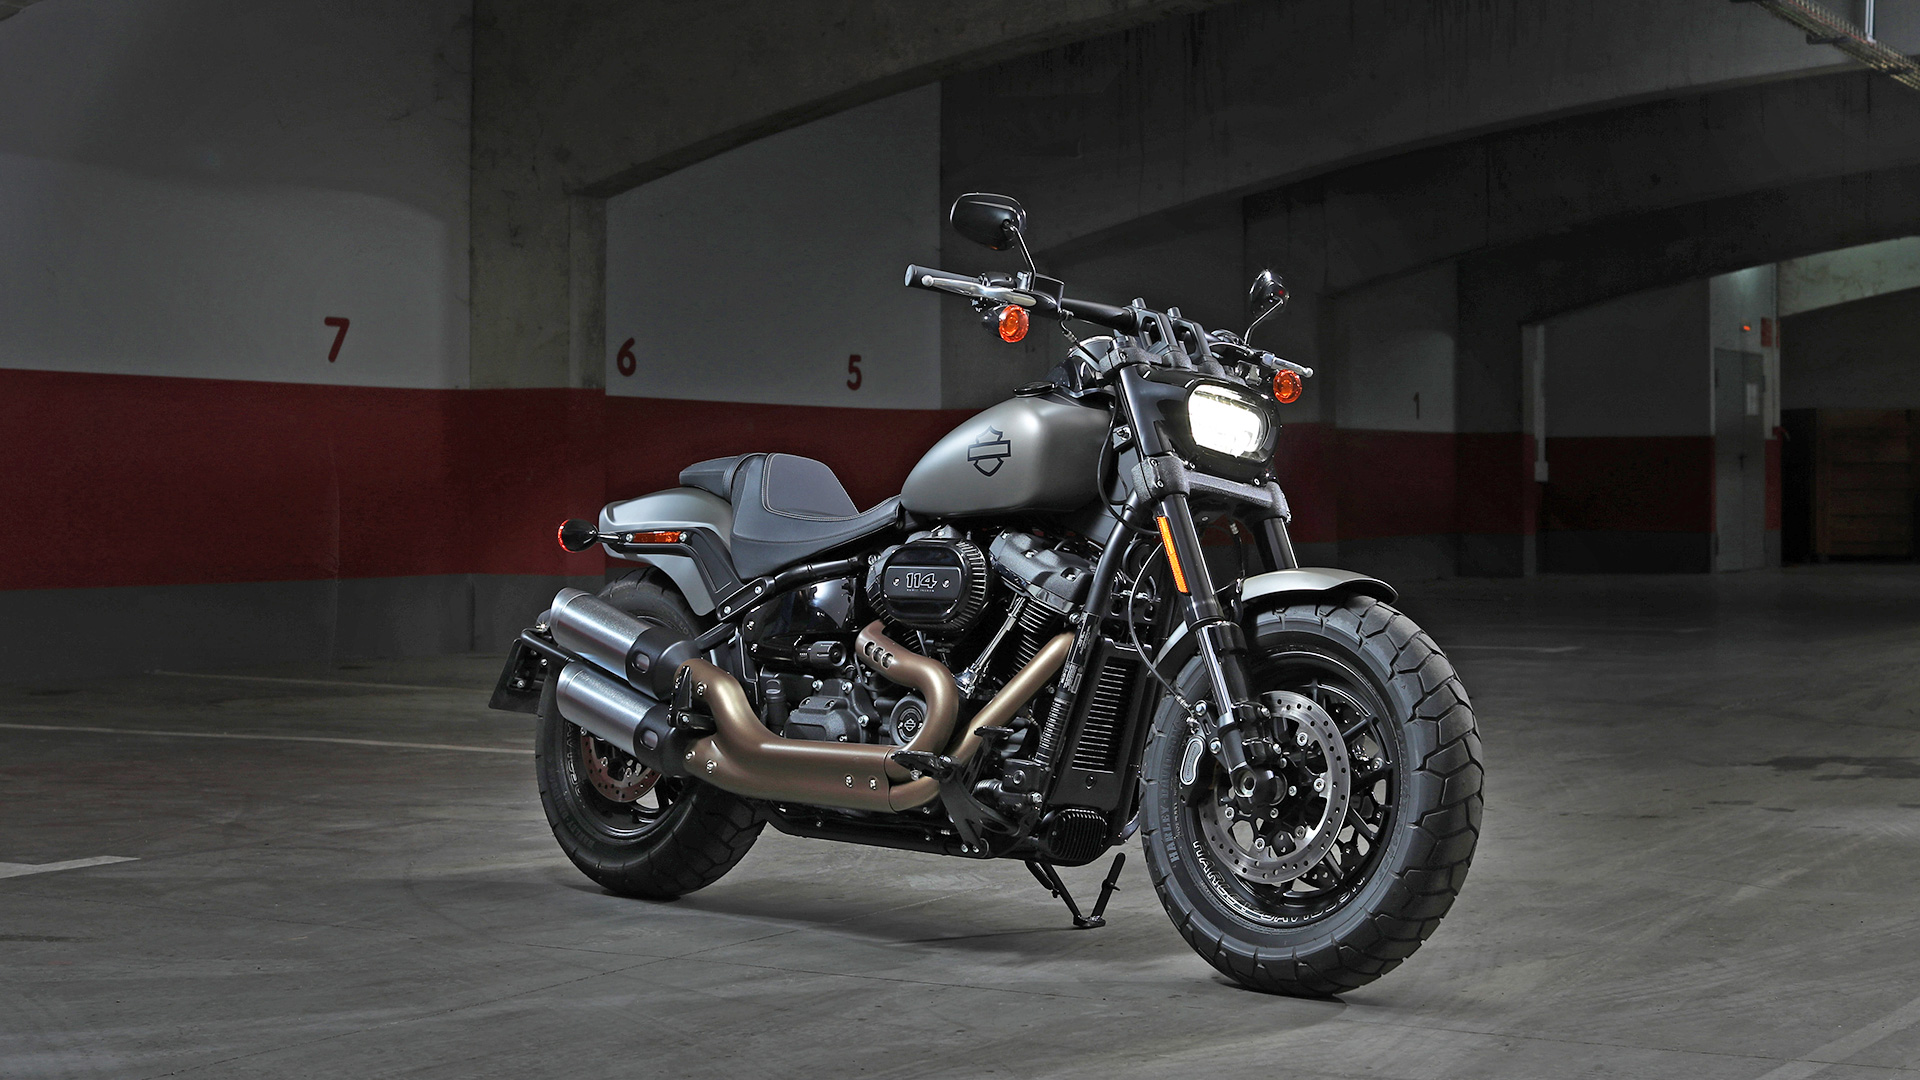 Harley Davidson Fat Bob 2018 107 Price Mileage Reviews Specification Gallery Overdrive